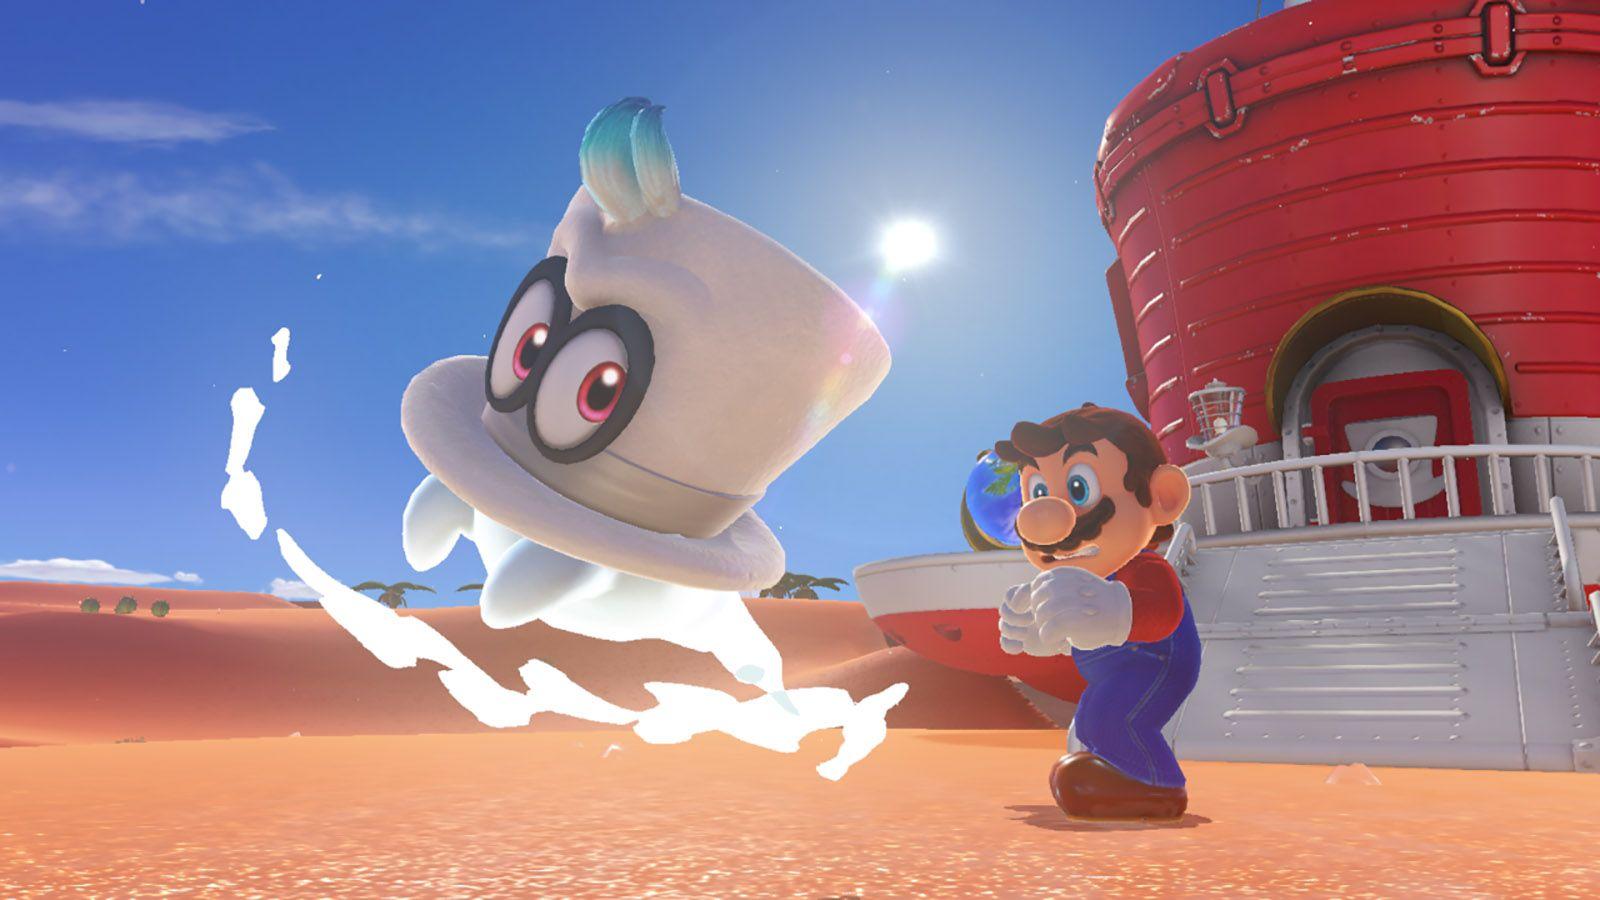 Super Mario Odyssey' may look bizarre, but it feels just right